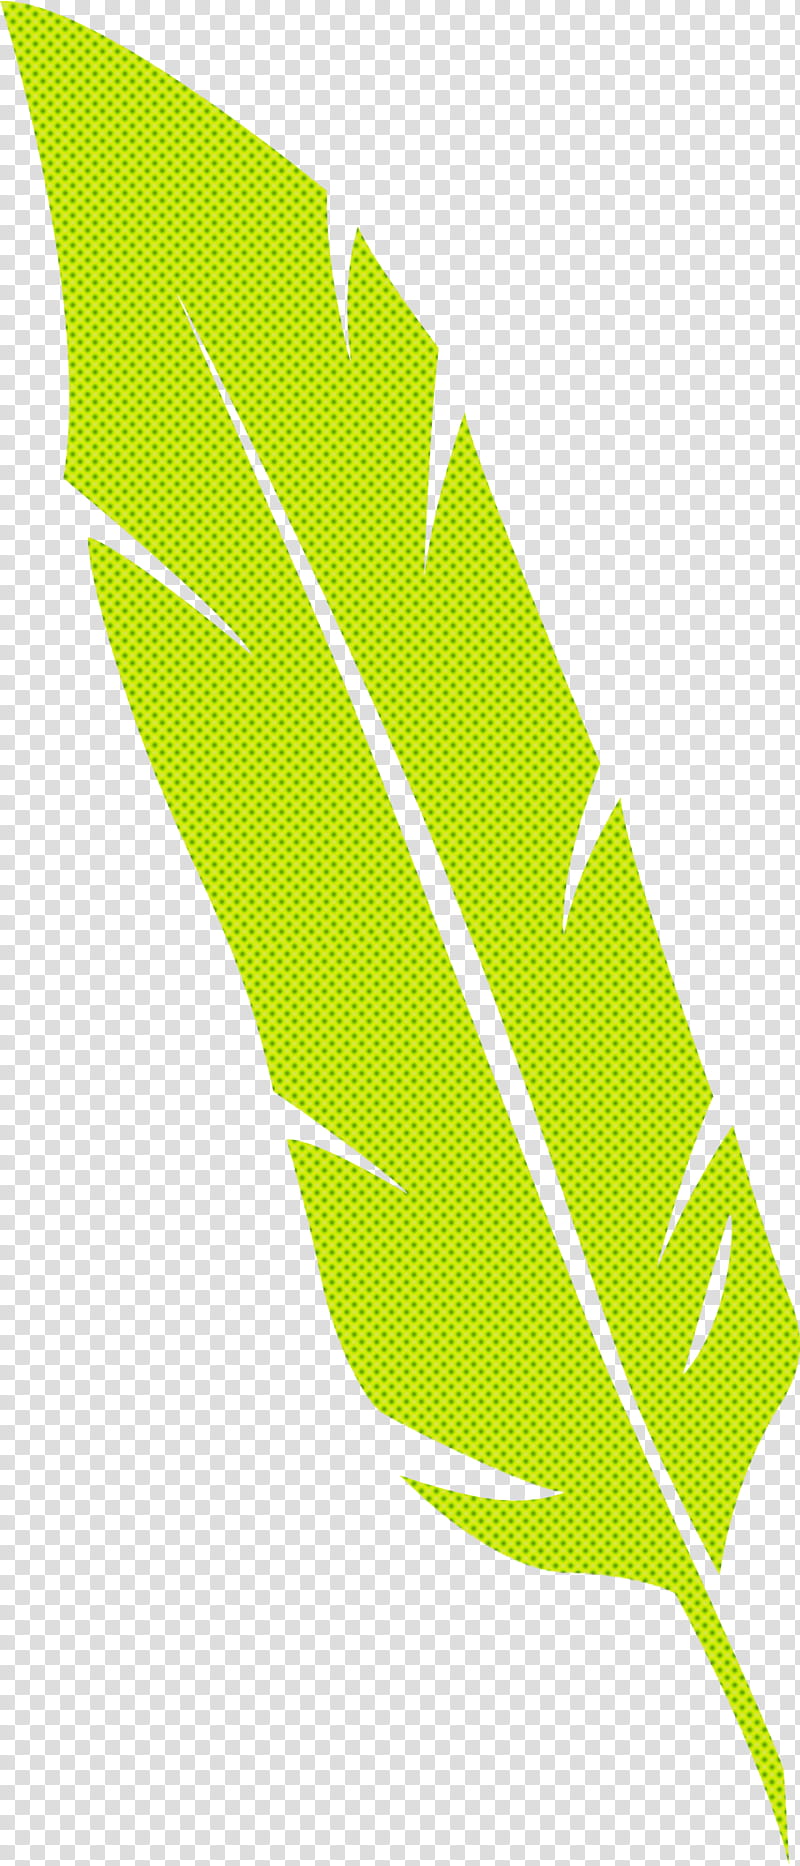 Feather, Leaf, Plant Stem, Leaf Angle Distribution, Drawing, Palm Trees, Plant Structure, Plants transparent background PNG clipart